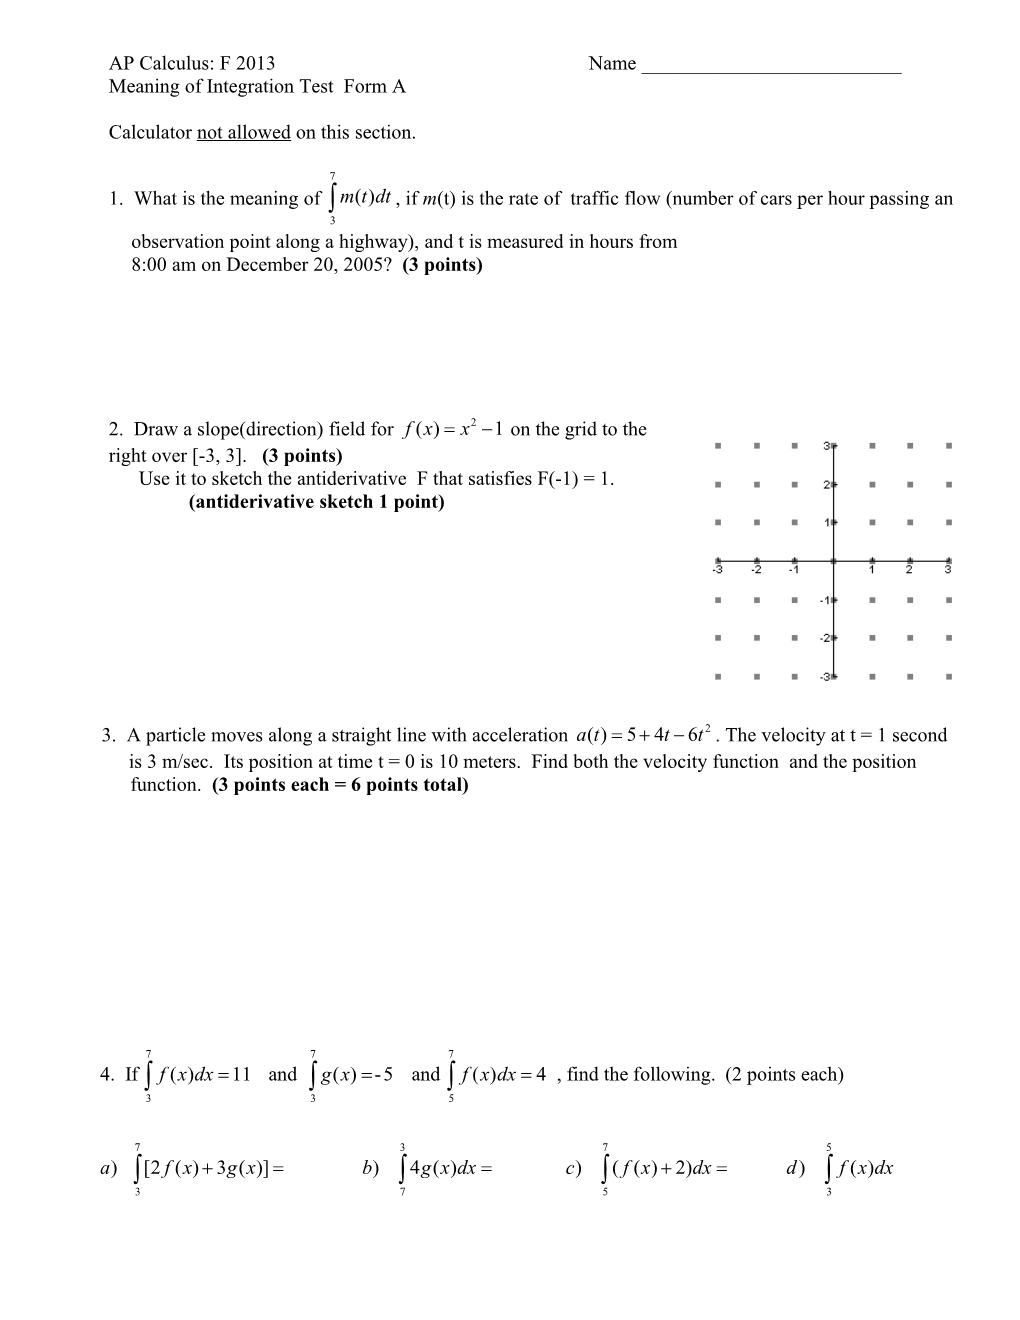 Meaning of Integration Test Form A